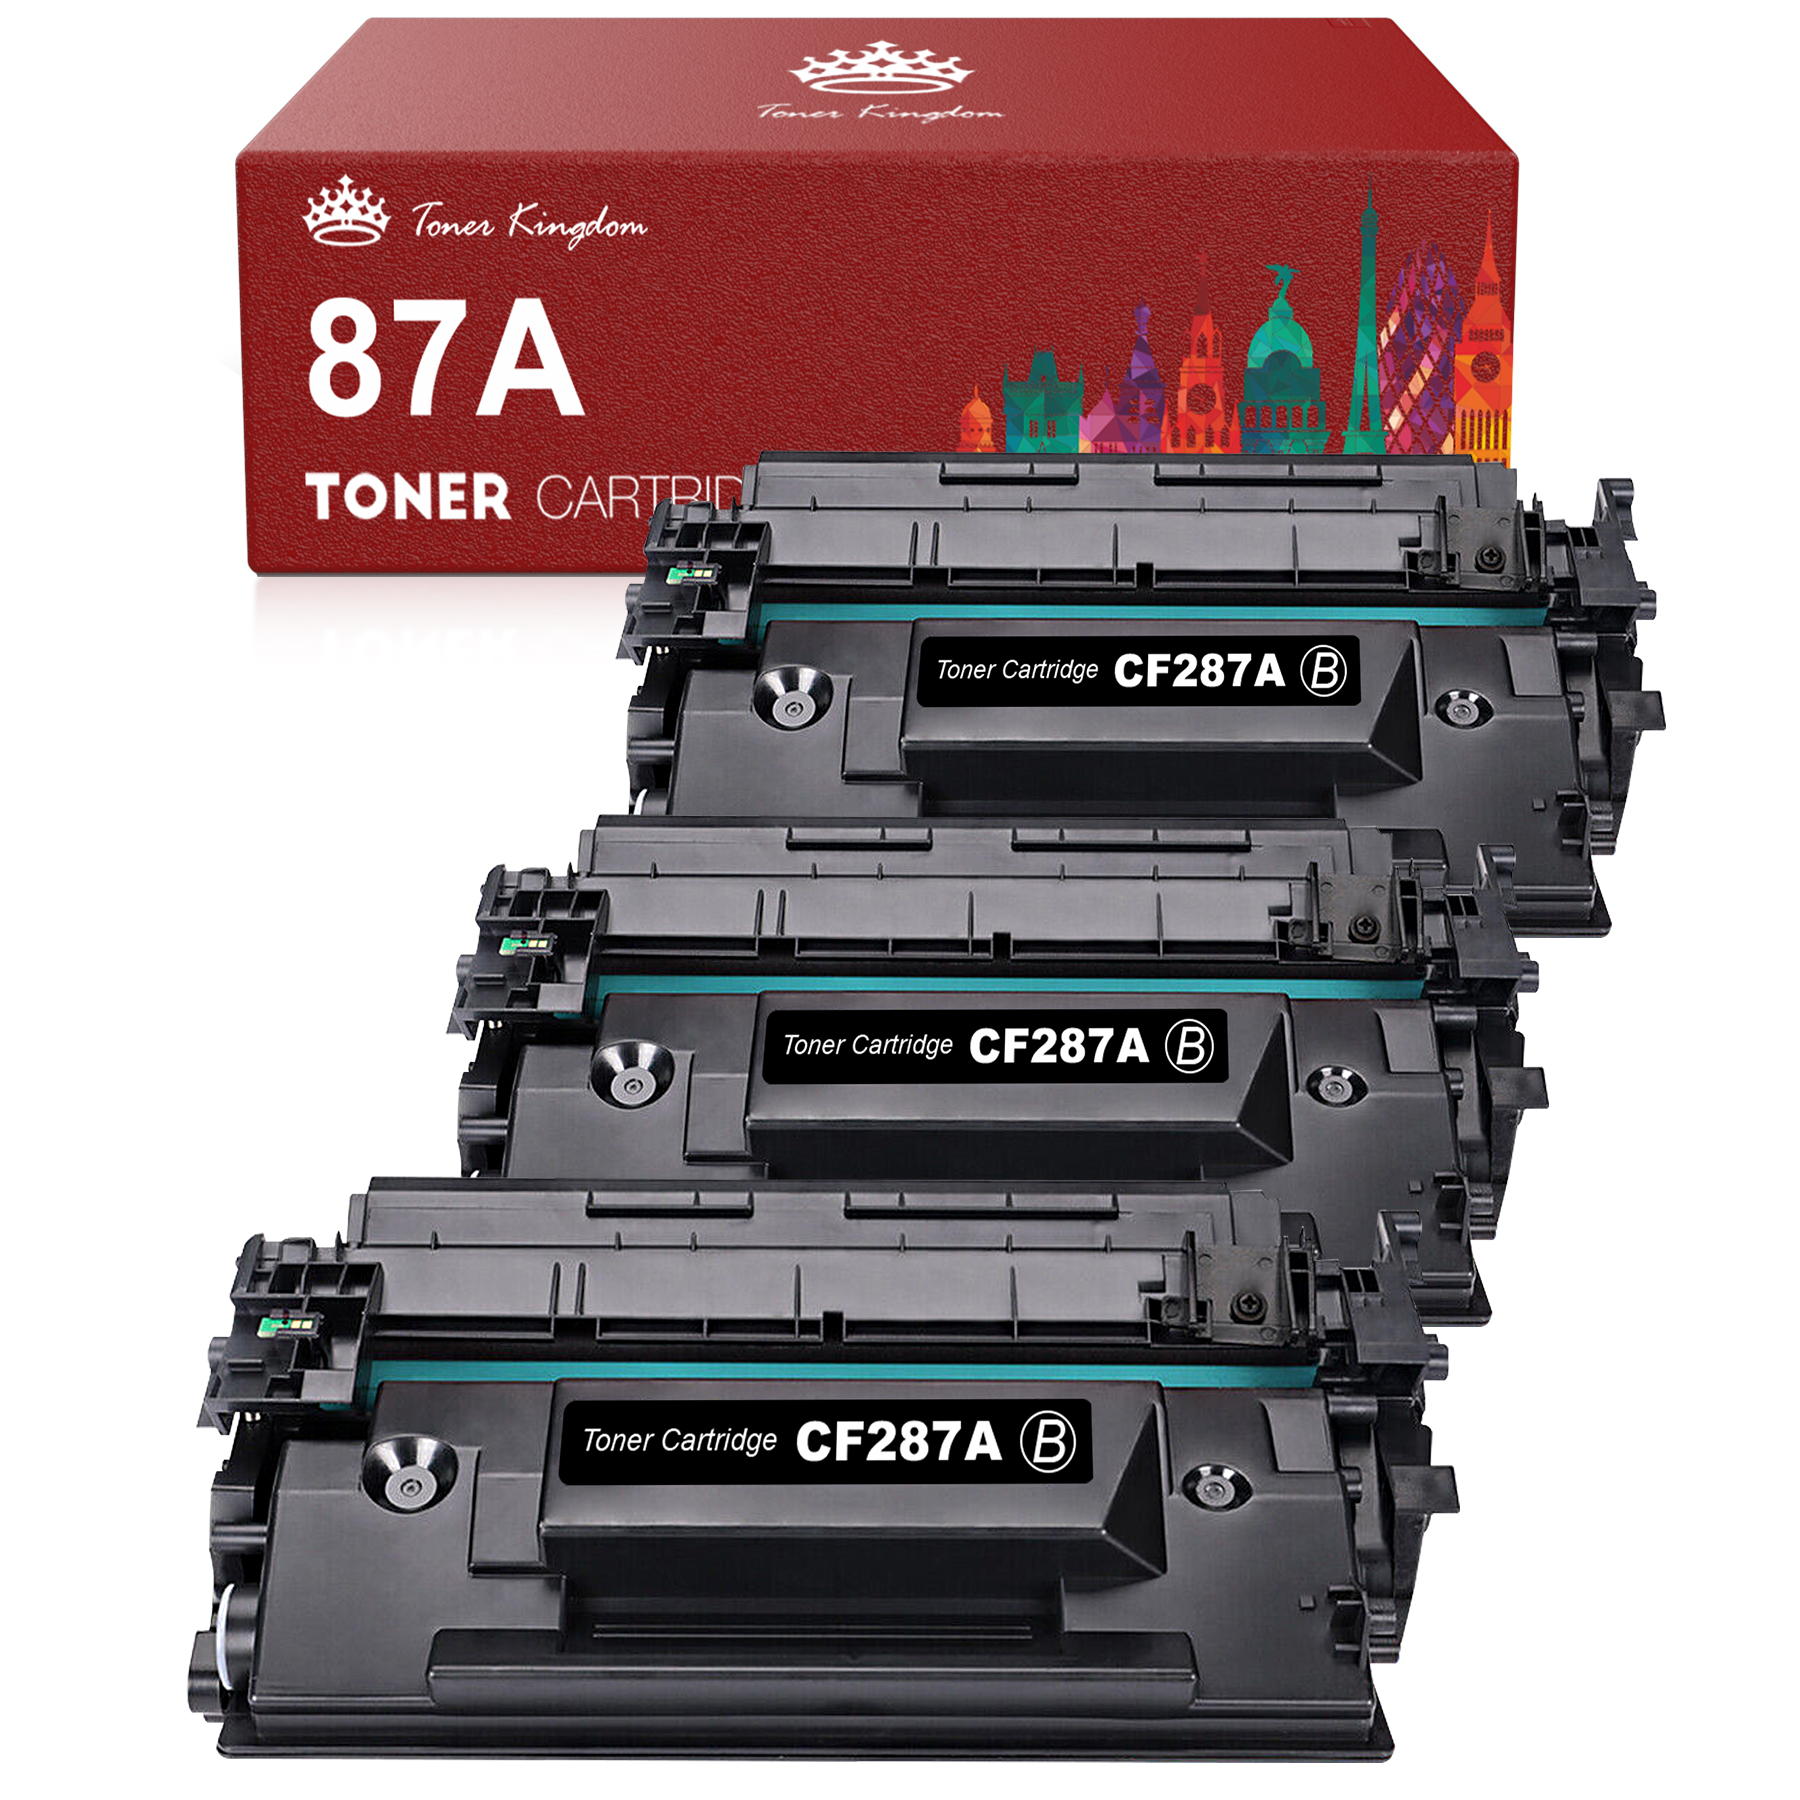 3 pack 87A (CF287A) Toner Cartridge compatible for HP 87A (CF287A) Toner Cartridge, Black - image 1 of 1